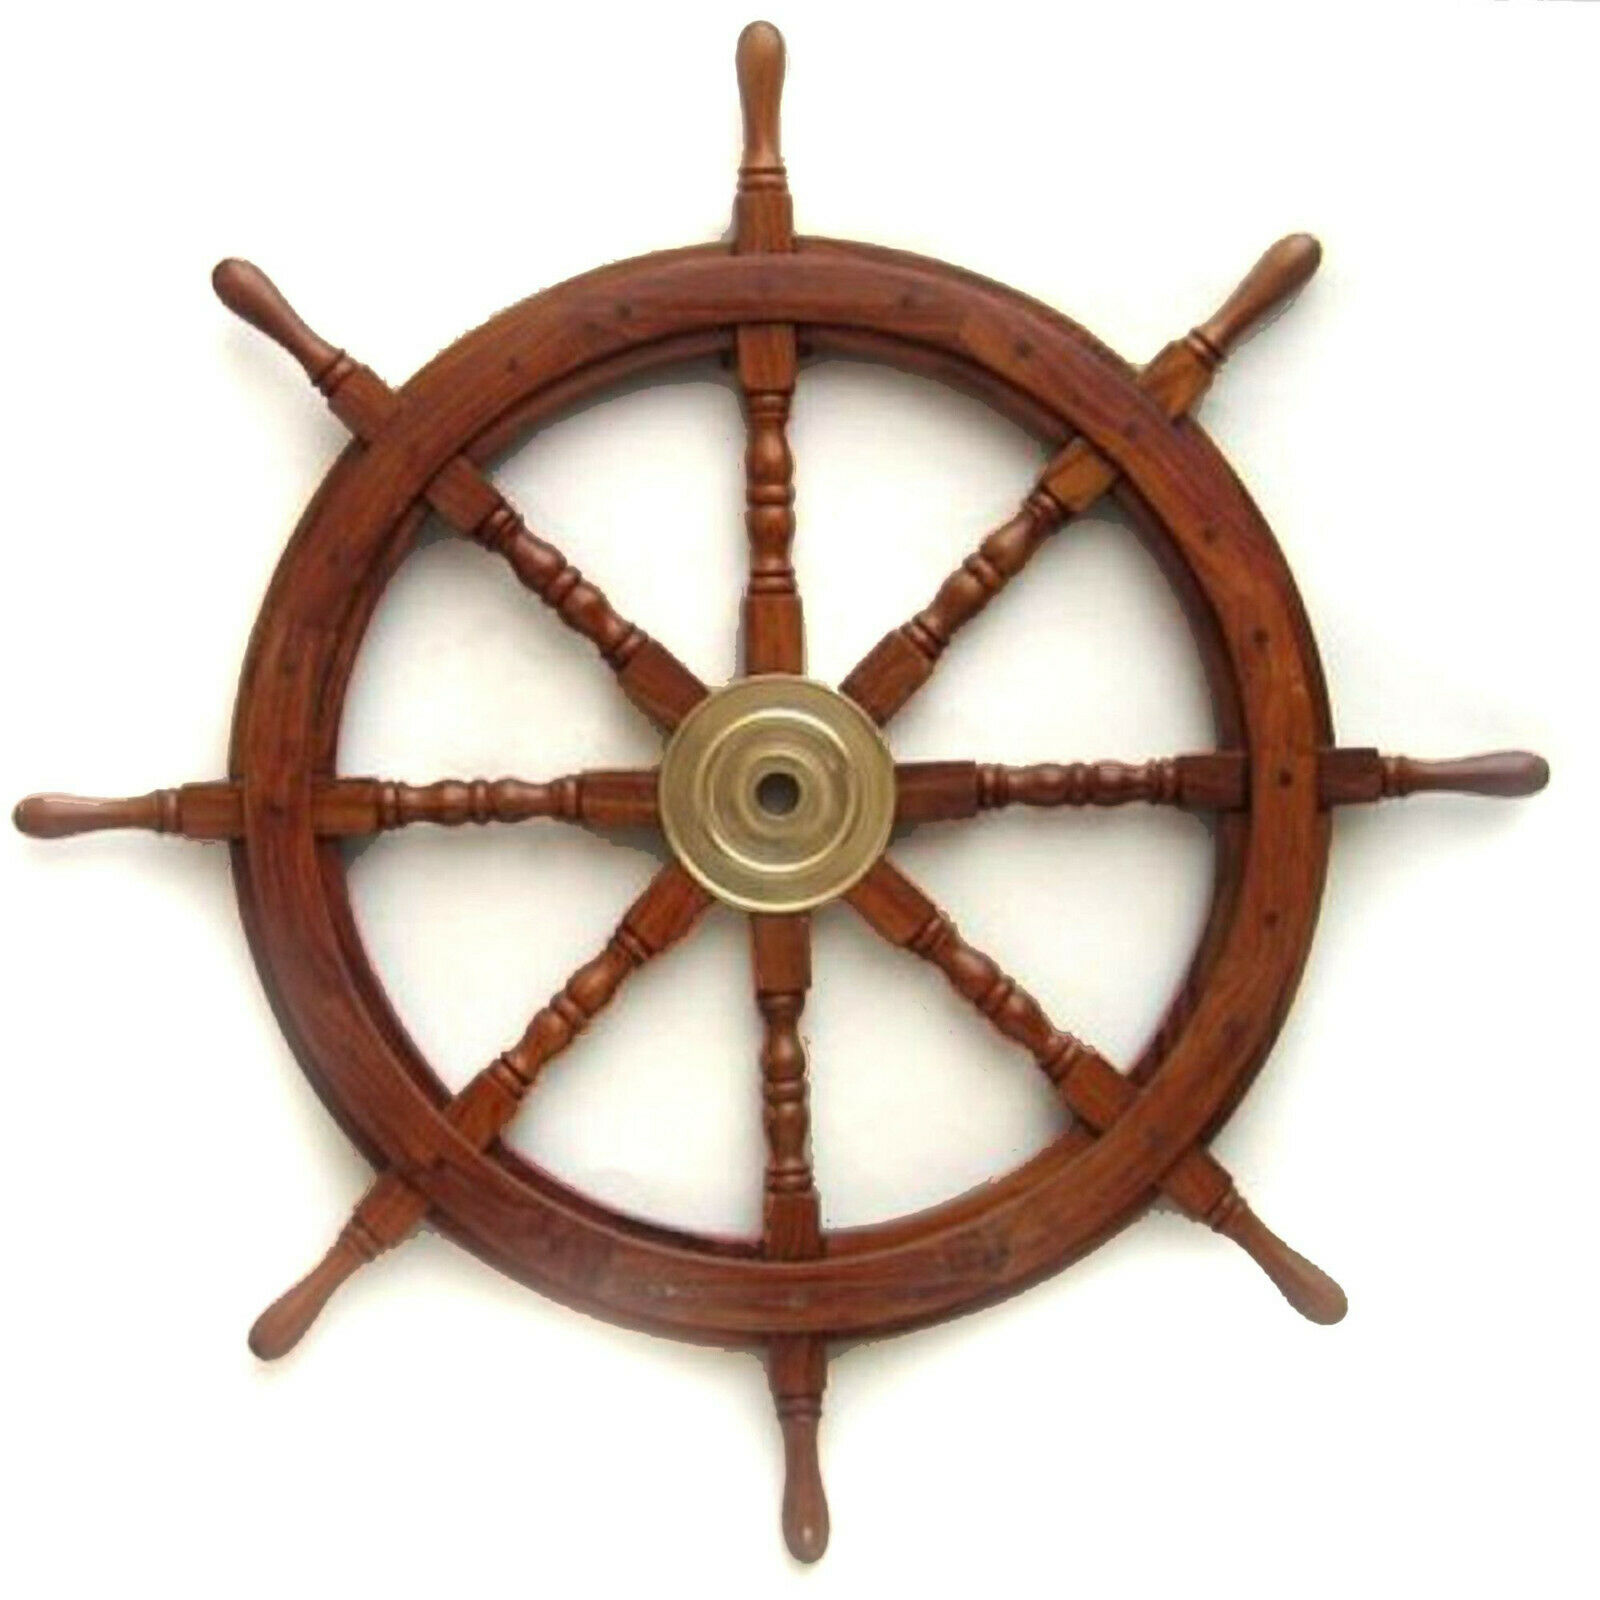 Large 36" Boat Ship Wooden Steering Wheel Brass Center Nautical Wall Decor New